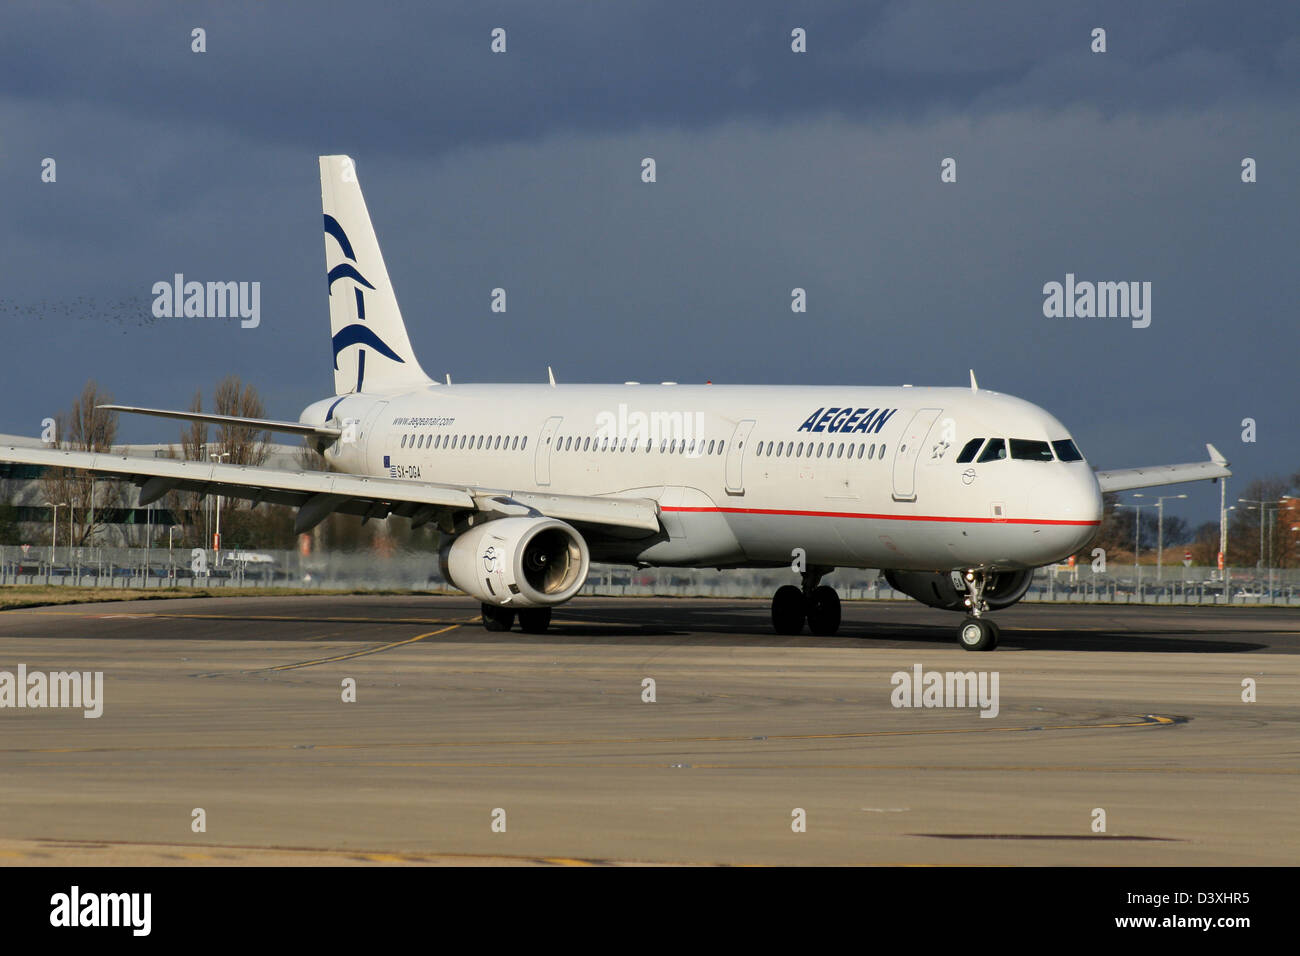 AEGEAN AIRLINES GREECE Stock Photo